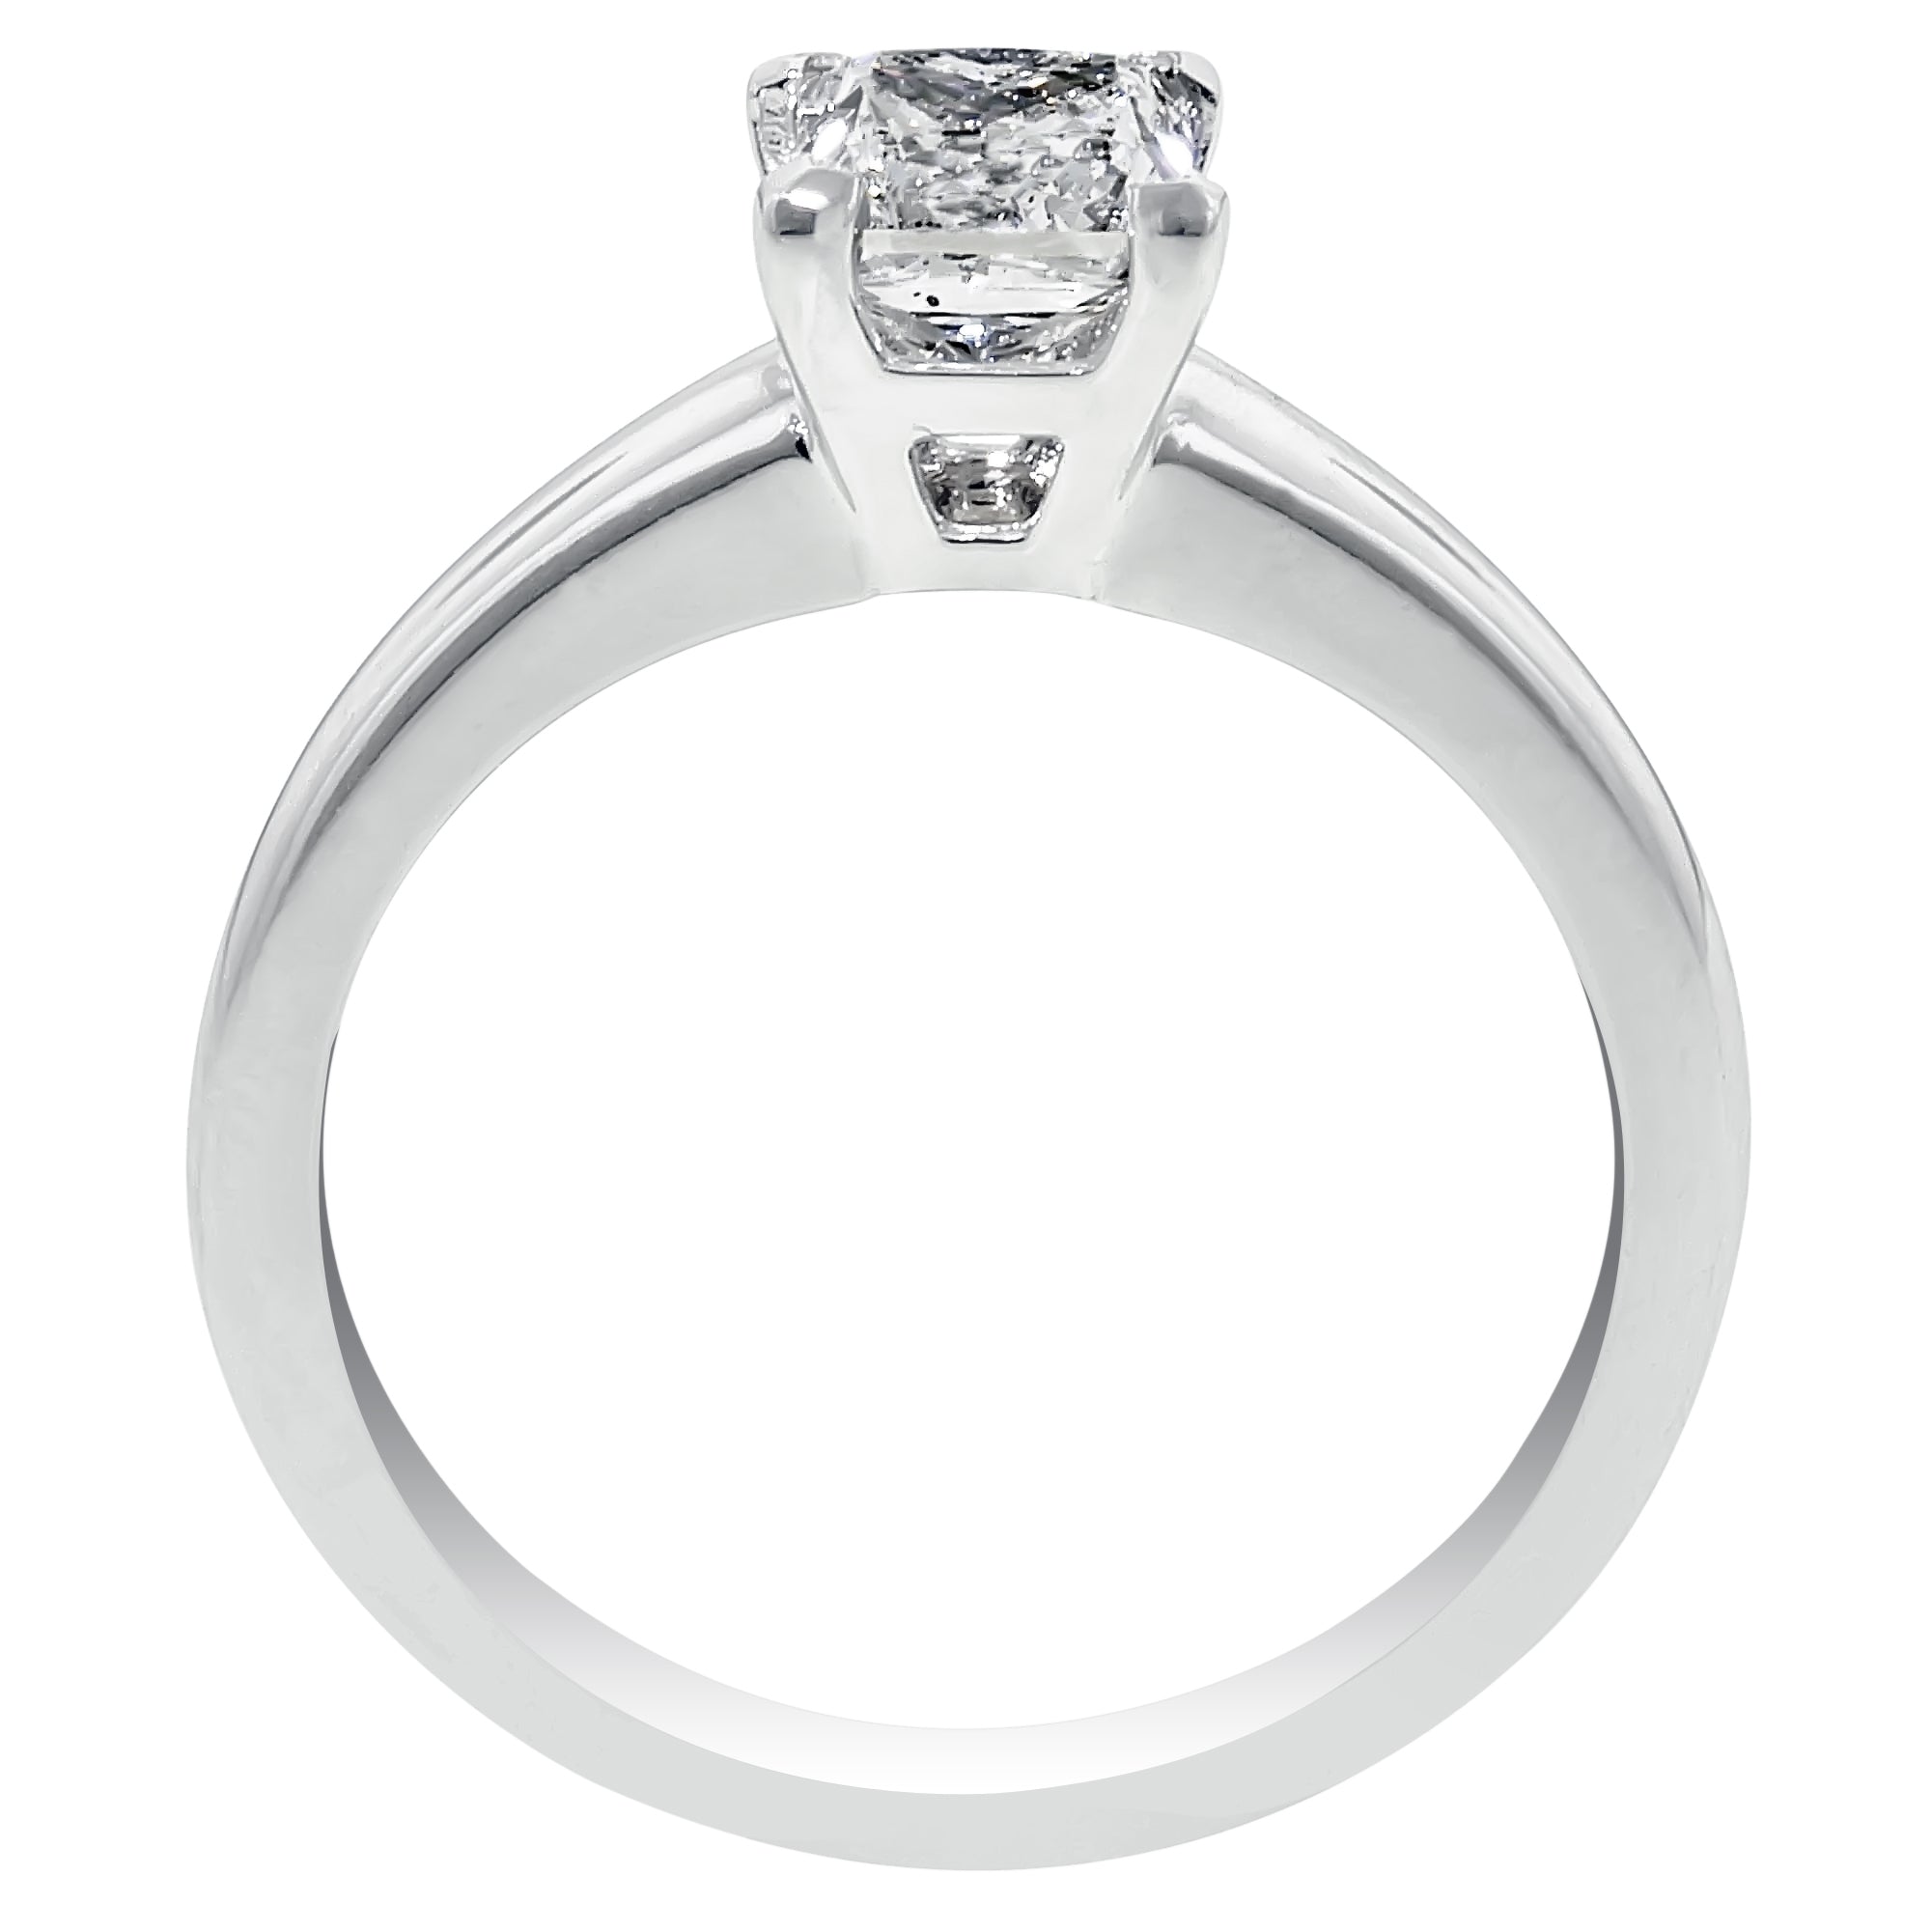 Princess Diamond Solitaire Ring in 14kt White Gold (1ct)